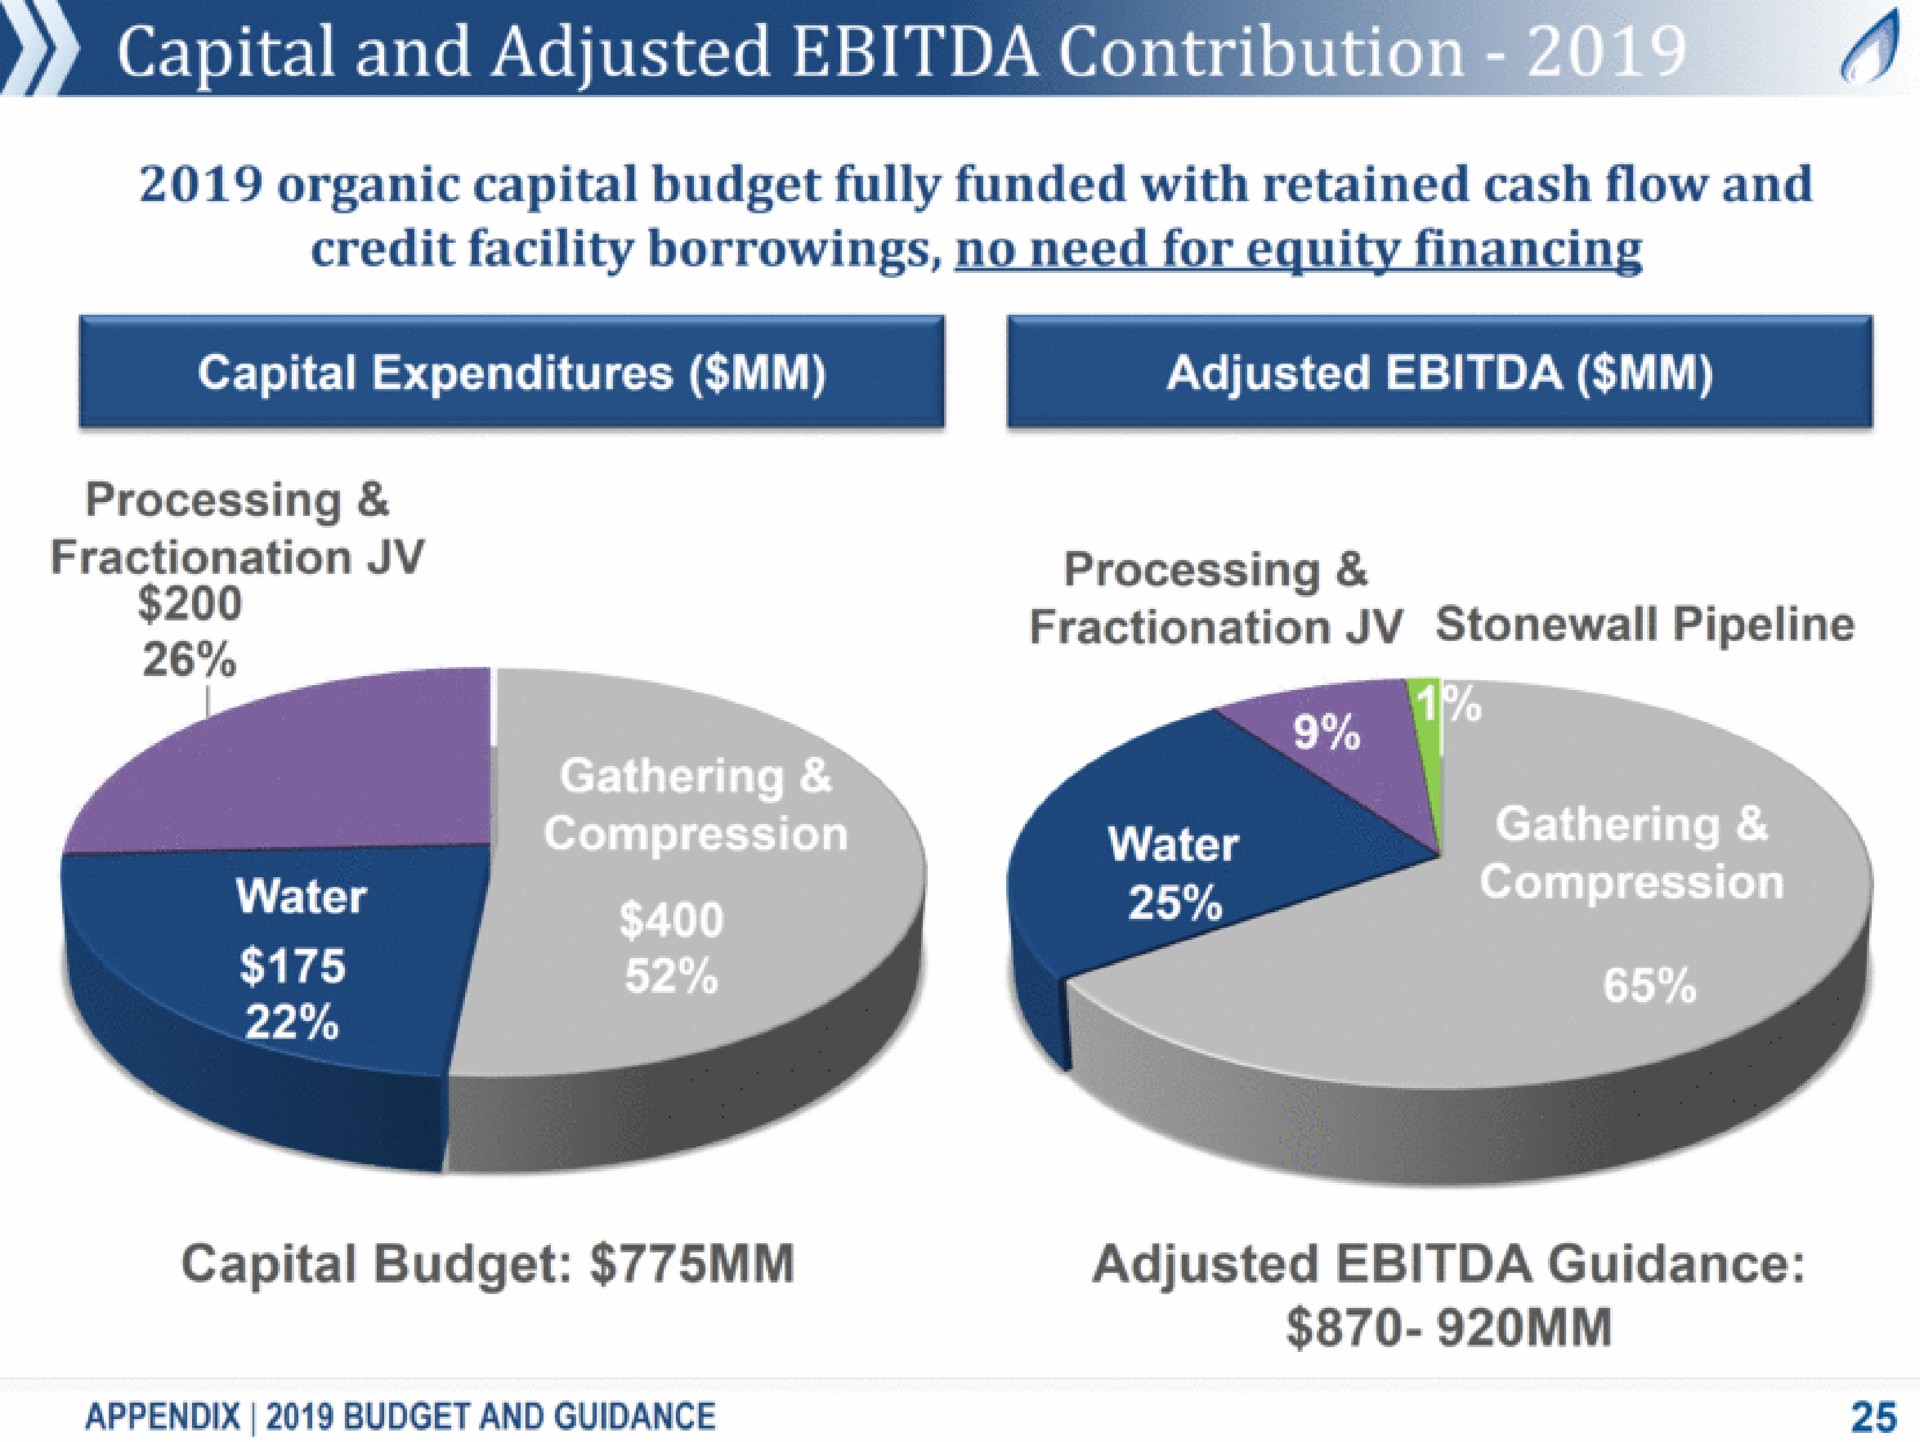 capital and adjusted organic capital budget fully funded with retained cash flow and fractionation stonewall pipeline capital budget adjusted guidance | Antero Midstream Partners